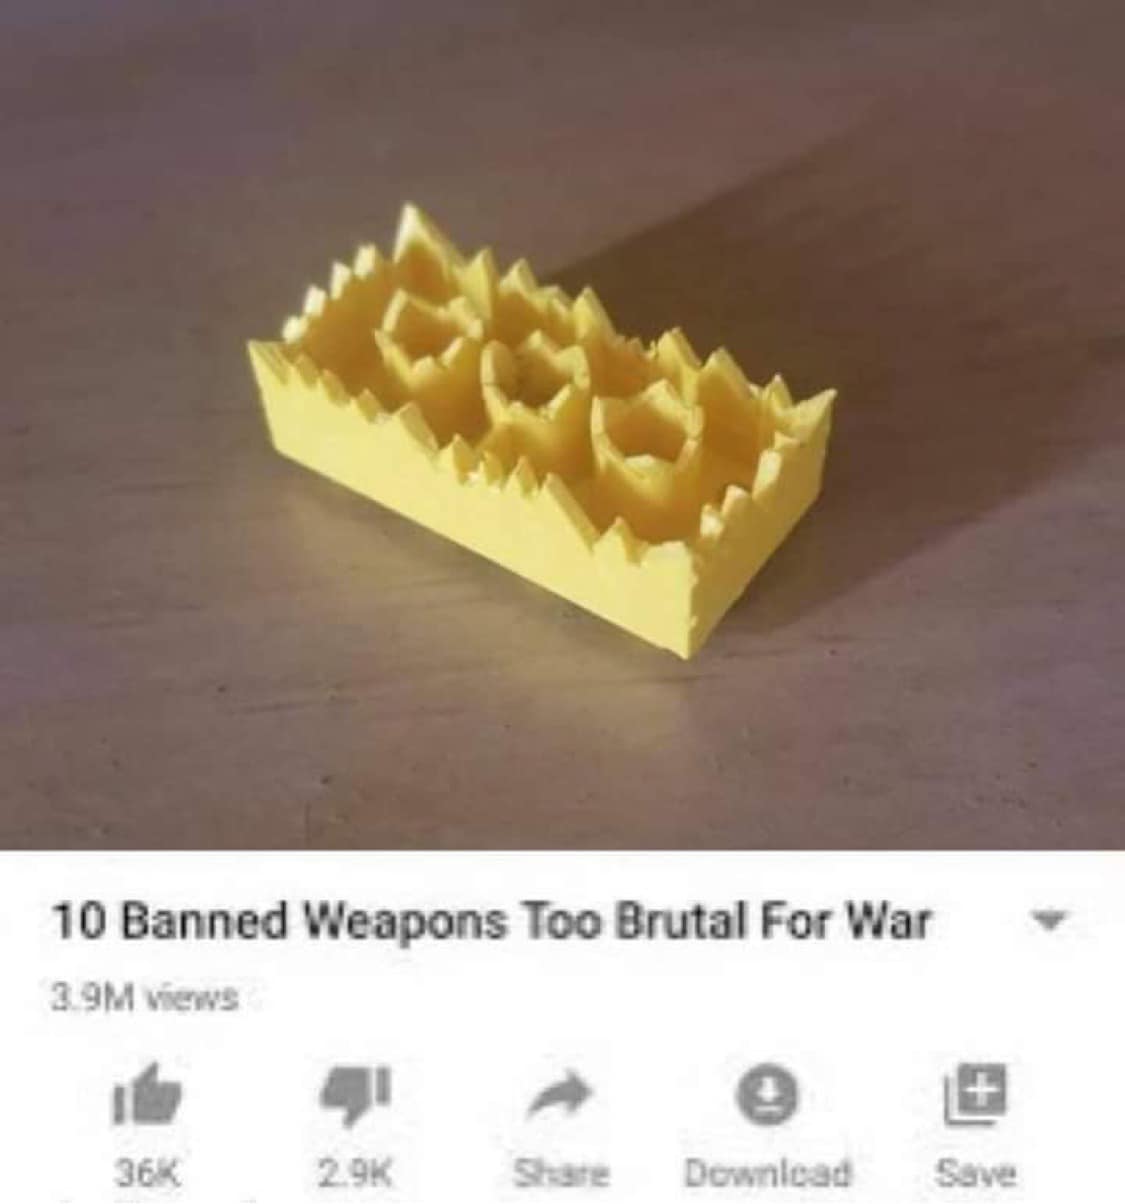 top 10 weapons to brutal for war - 10 Banned Weapons Too Brutal For War 3.9M views 36 . Download Save